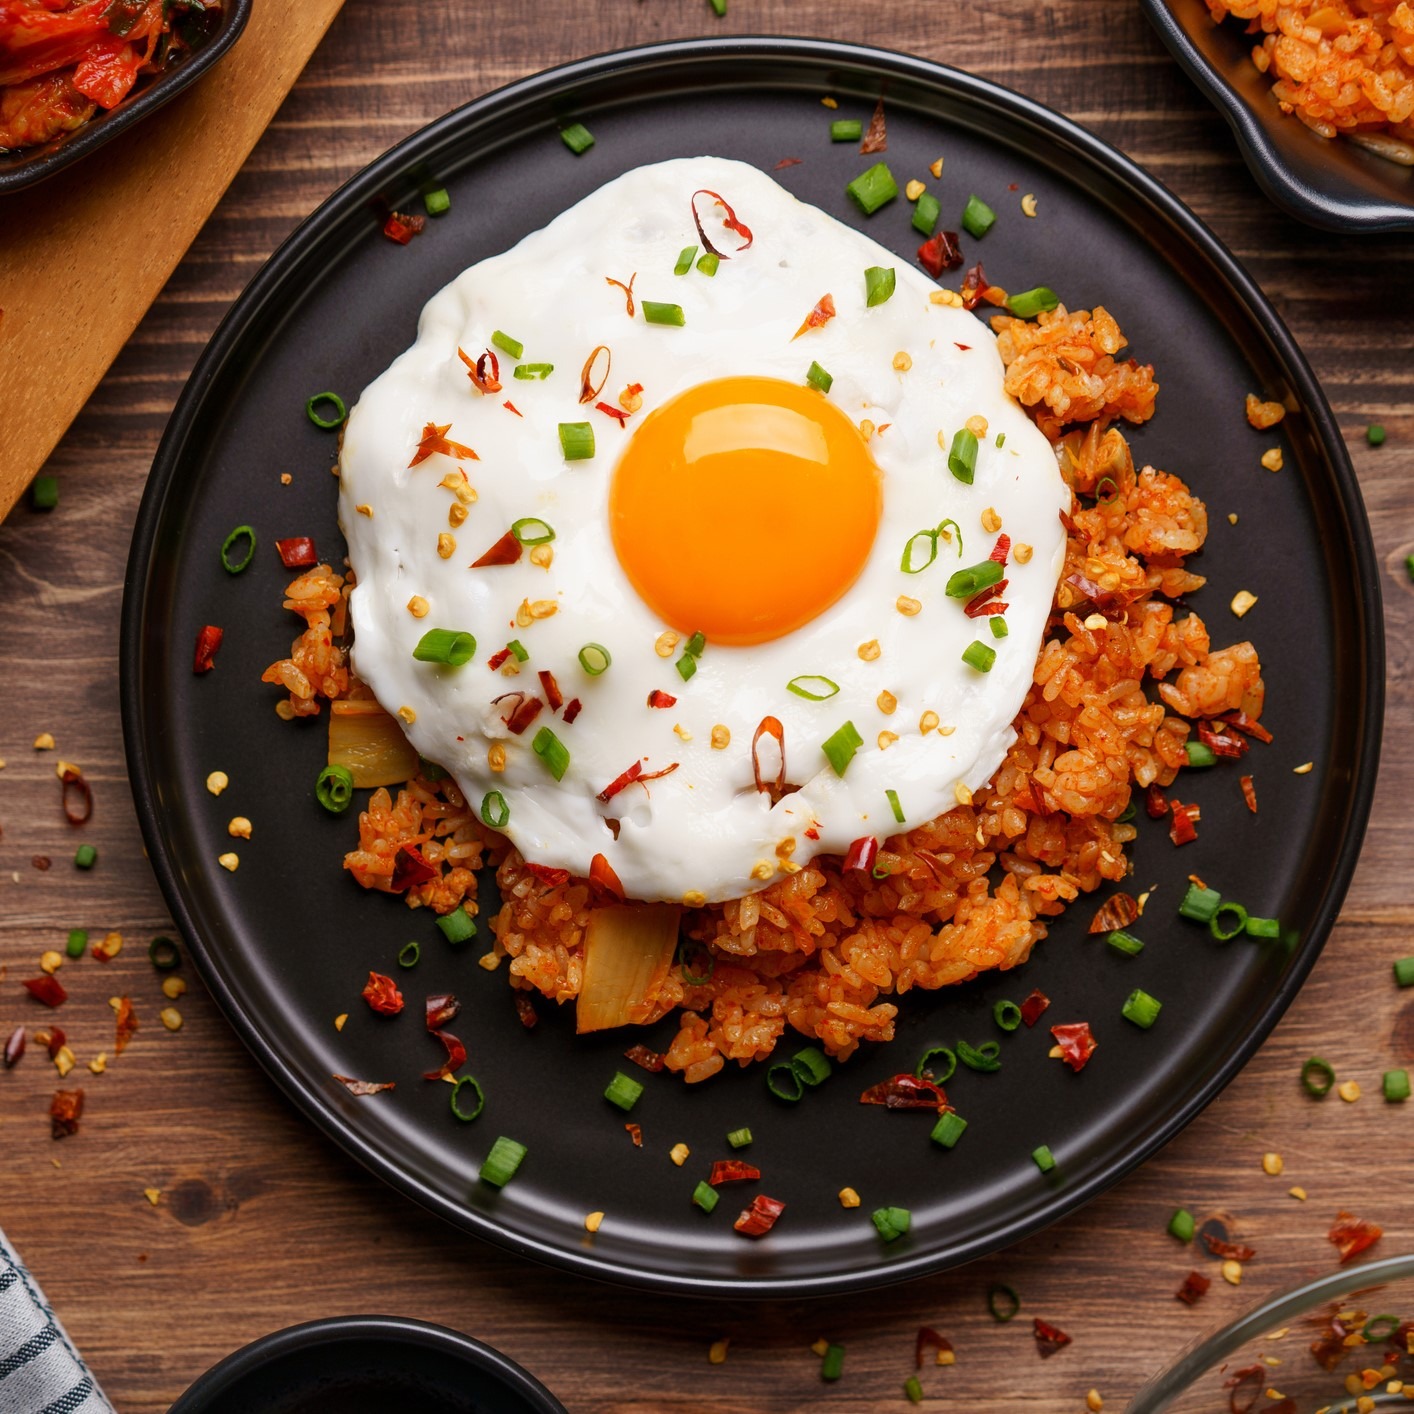 Fried rice with kimchi. Topped with fried egg, scallions and chili flakes. Black plate, dark wood background.